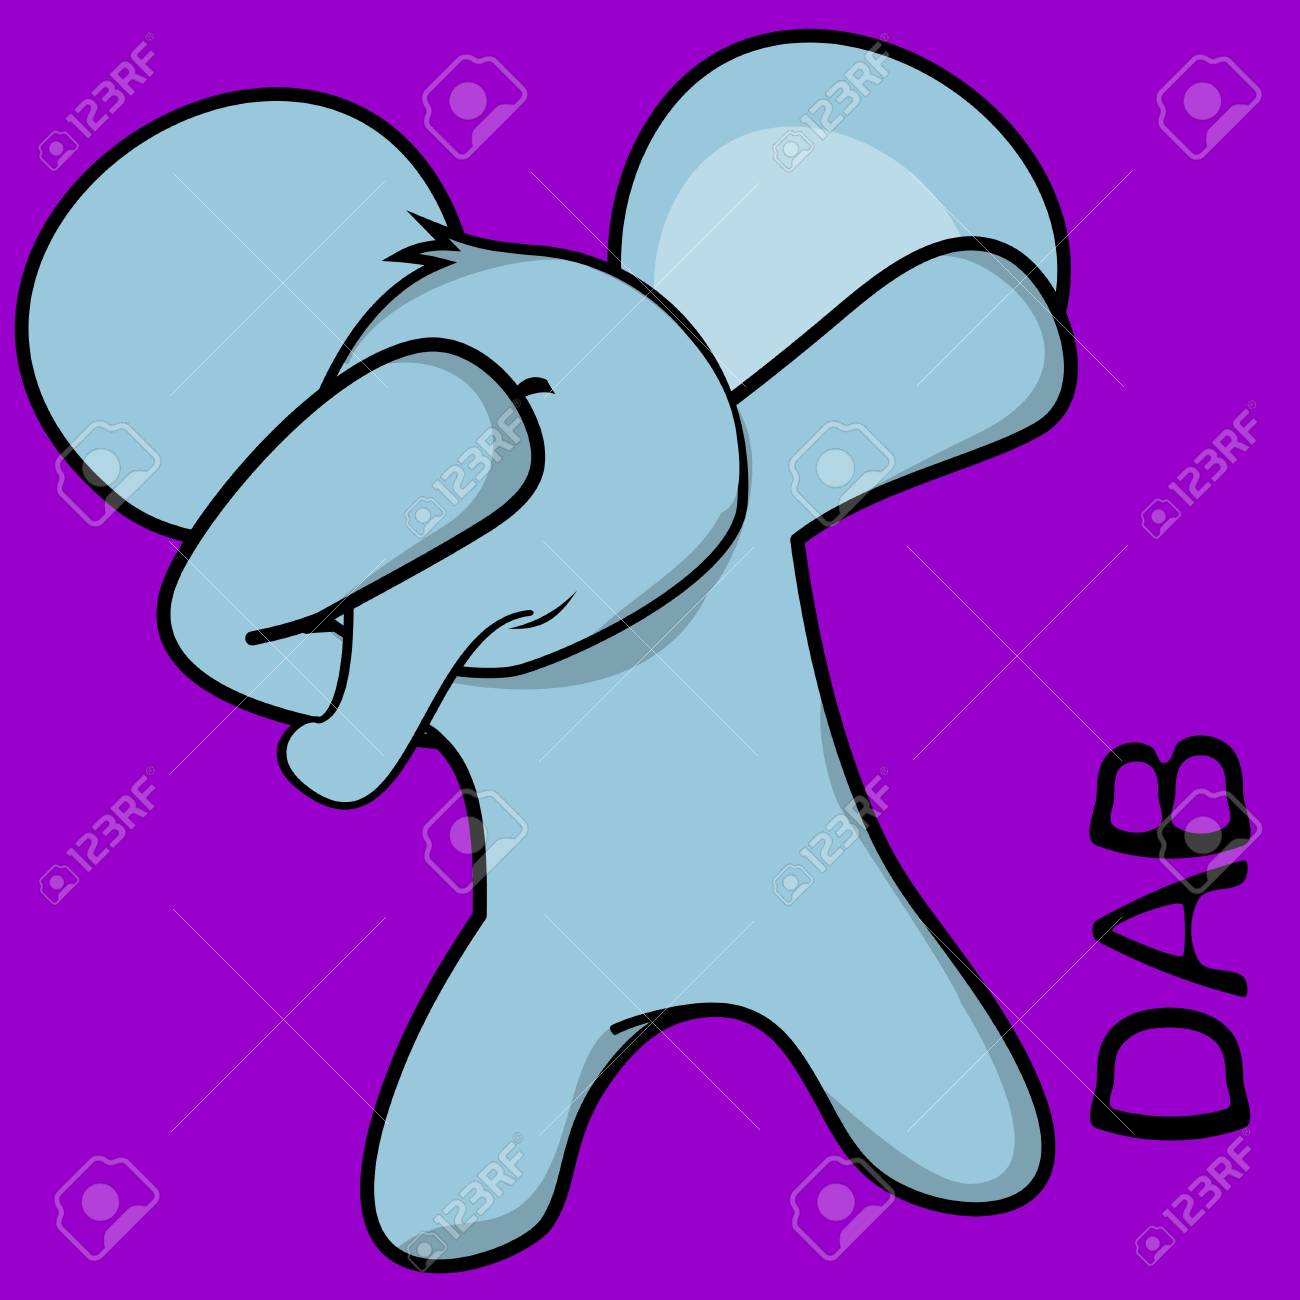 An Elephant In Dabbing Pose On Violet Background Royalty Free